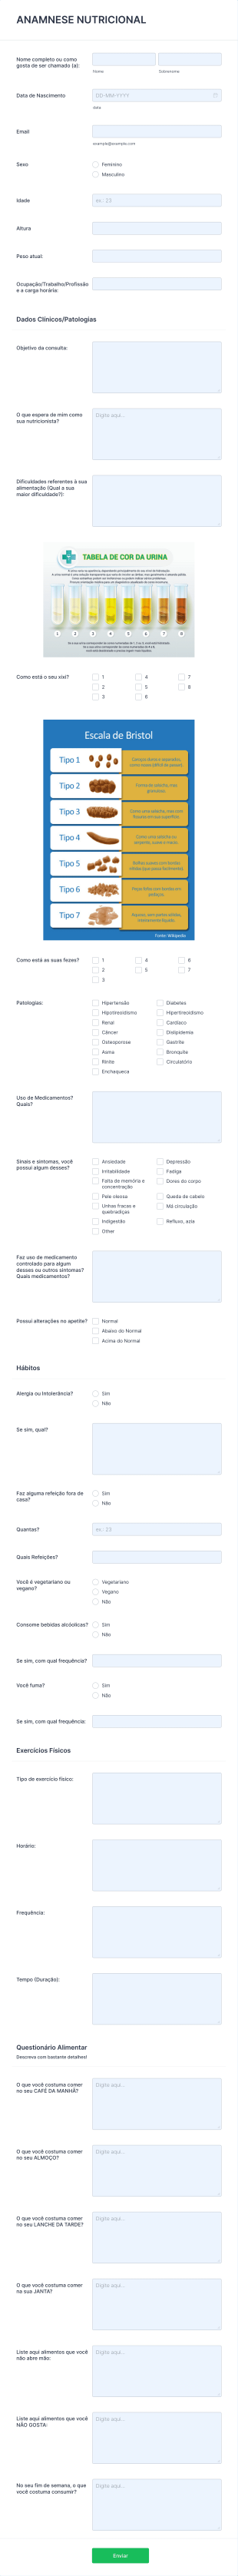 Anamnese Nutricional Form Template